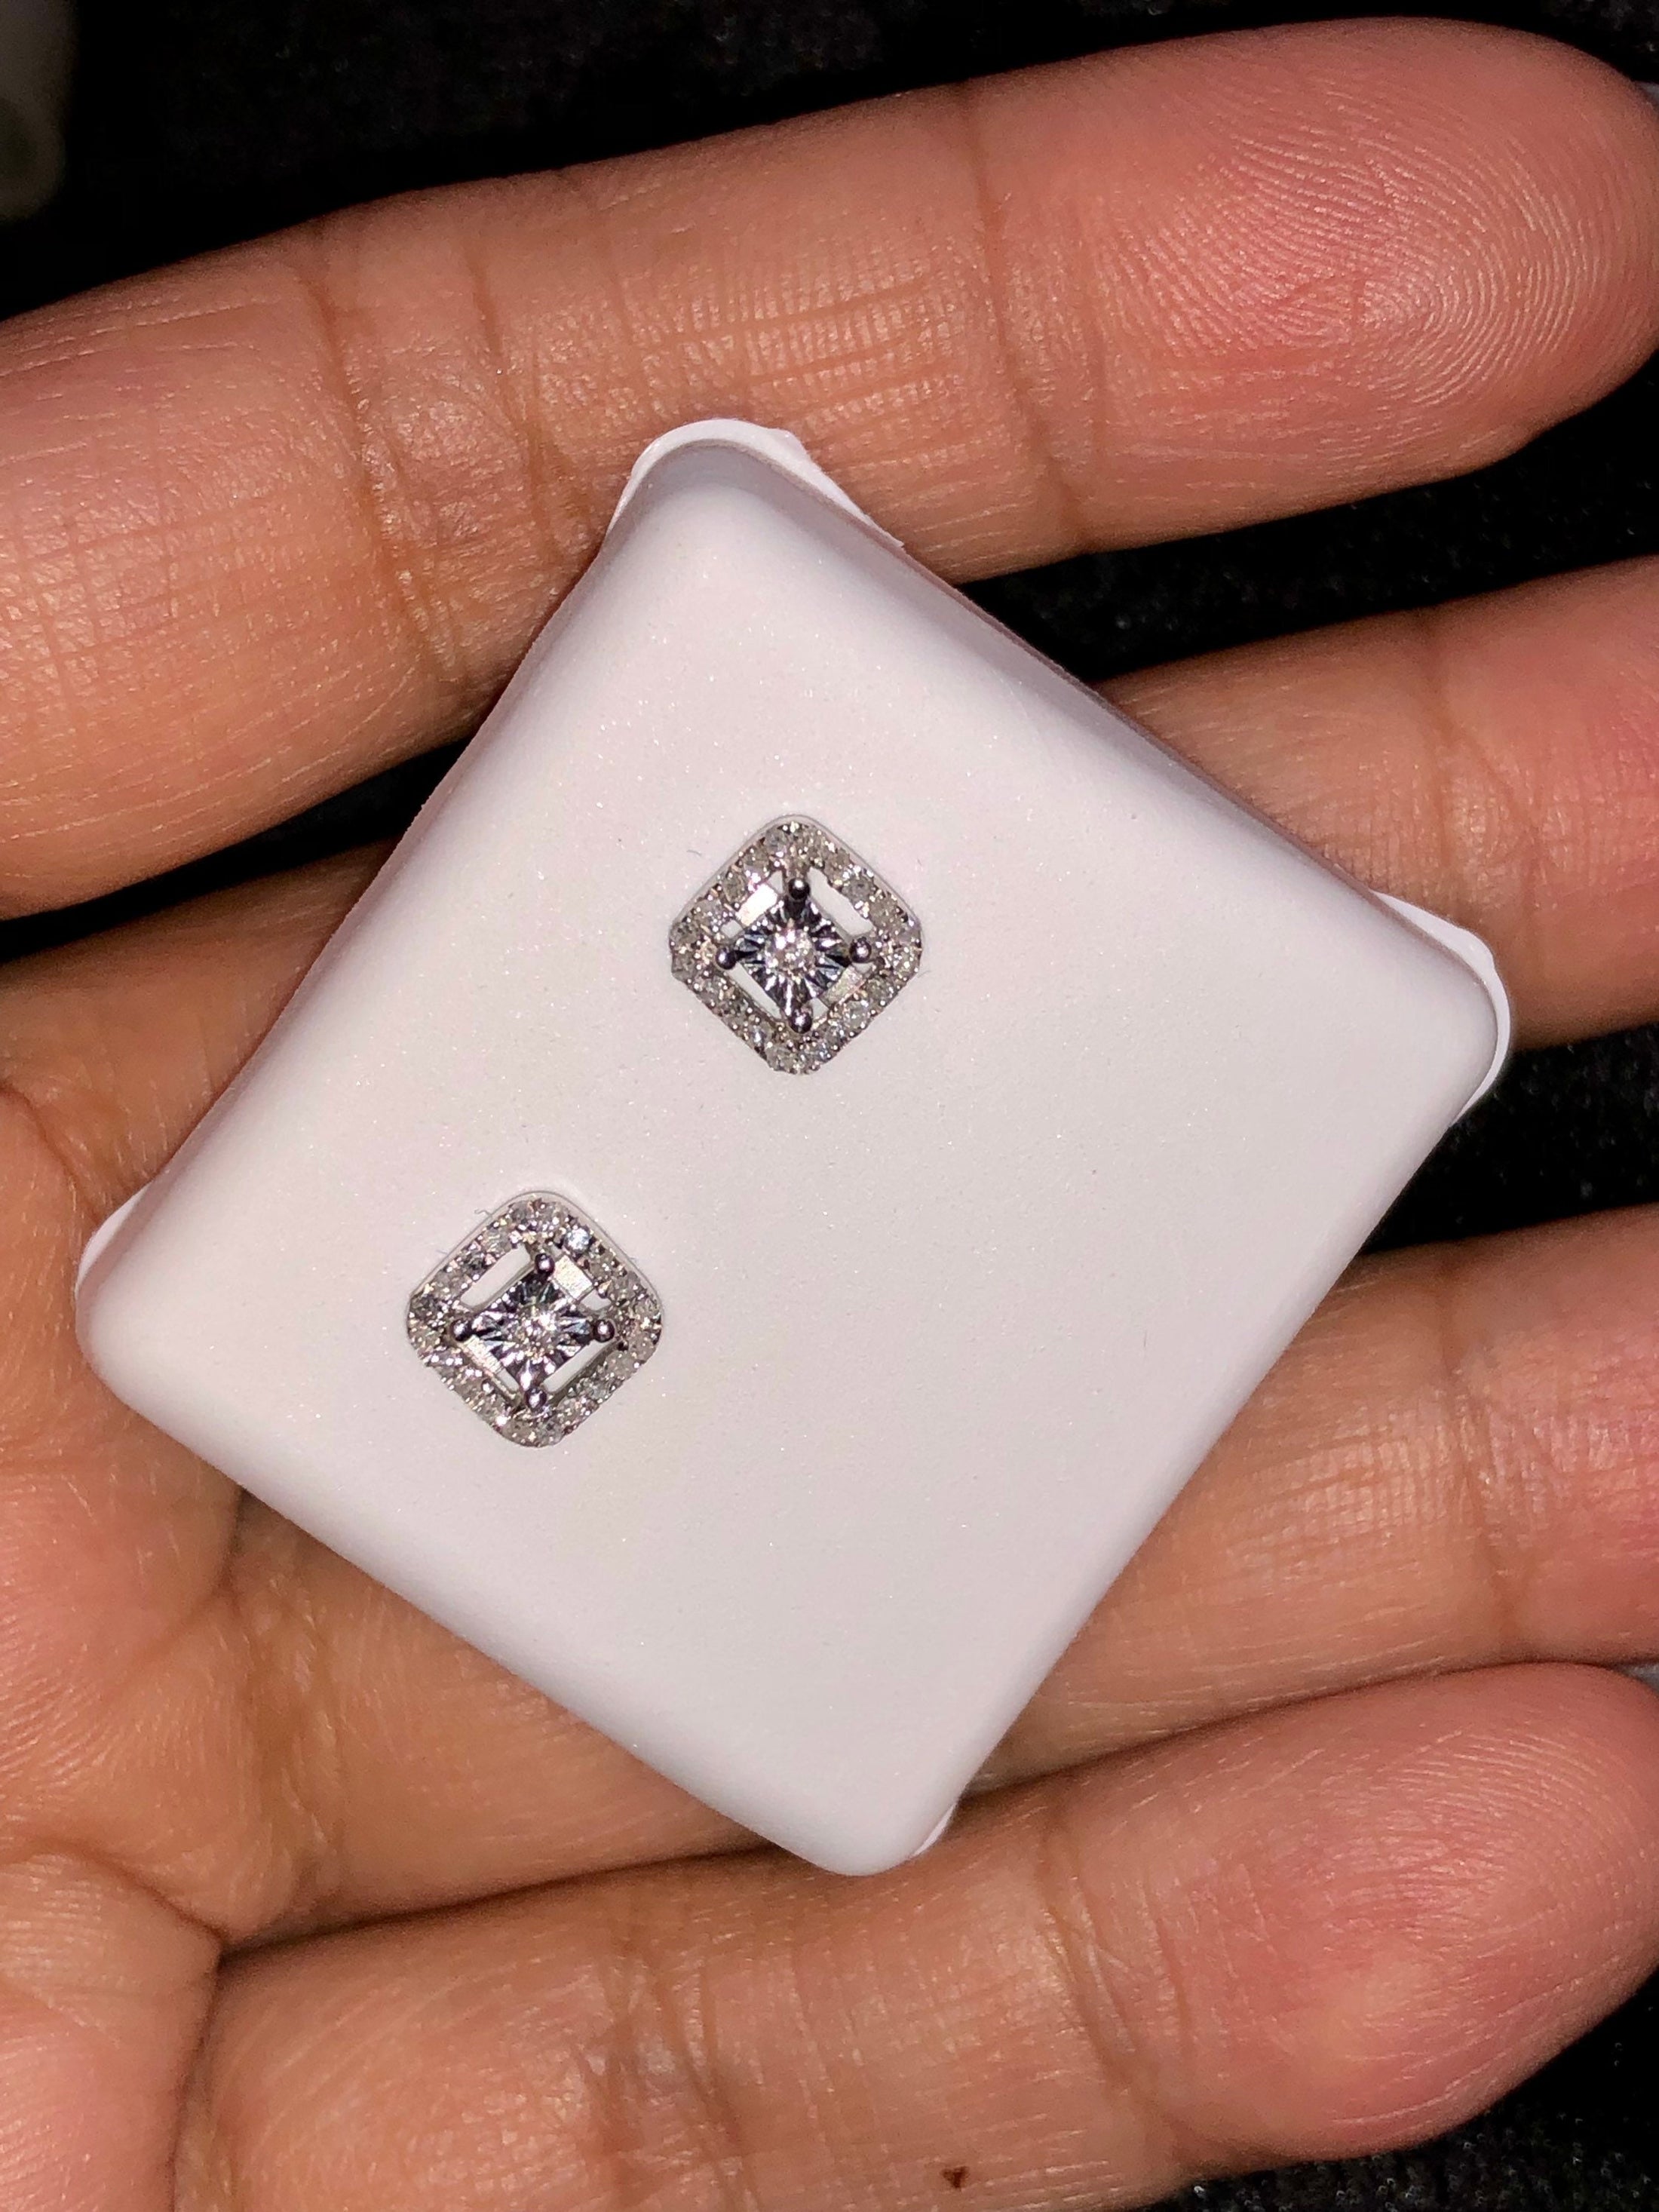 White gold Real Diamond earrings. Not CZ not moissanite comes w/ certificate of authenticity free gift packaging included best gift ever